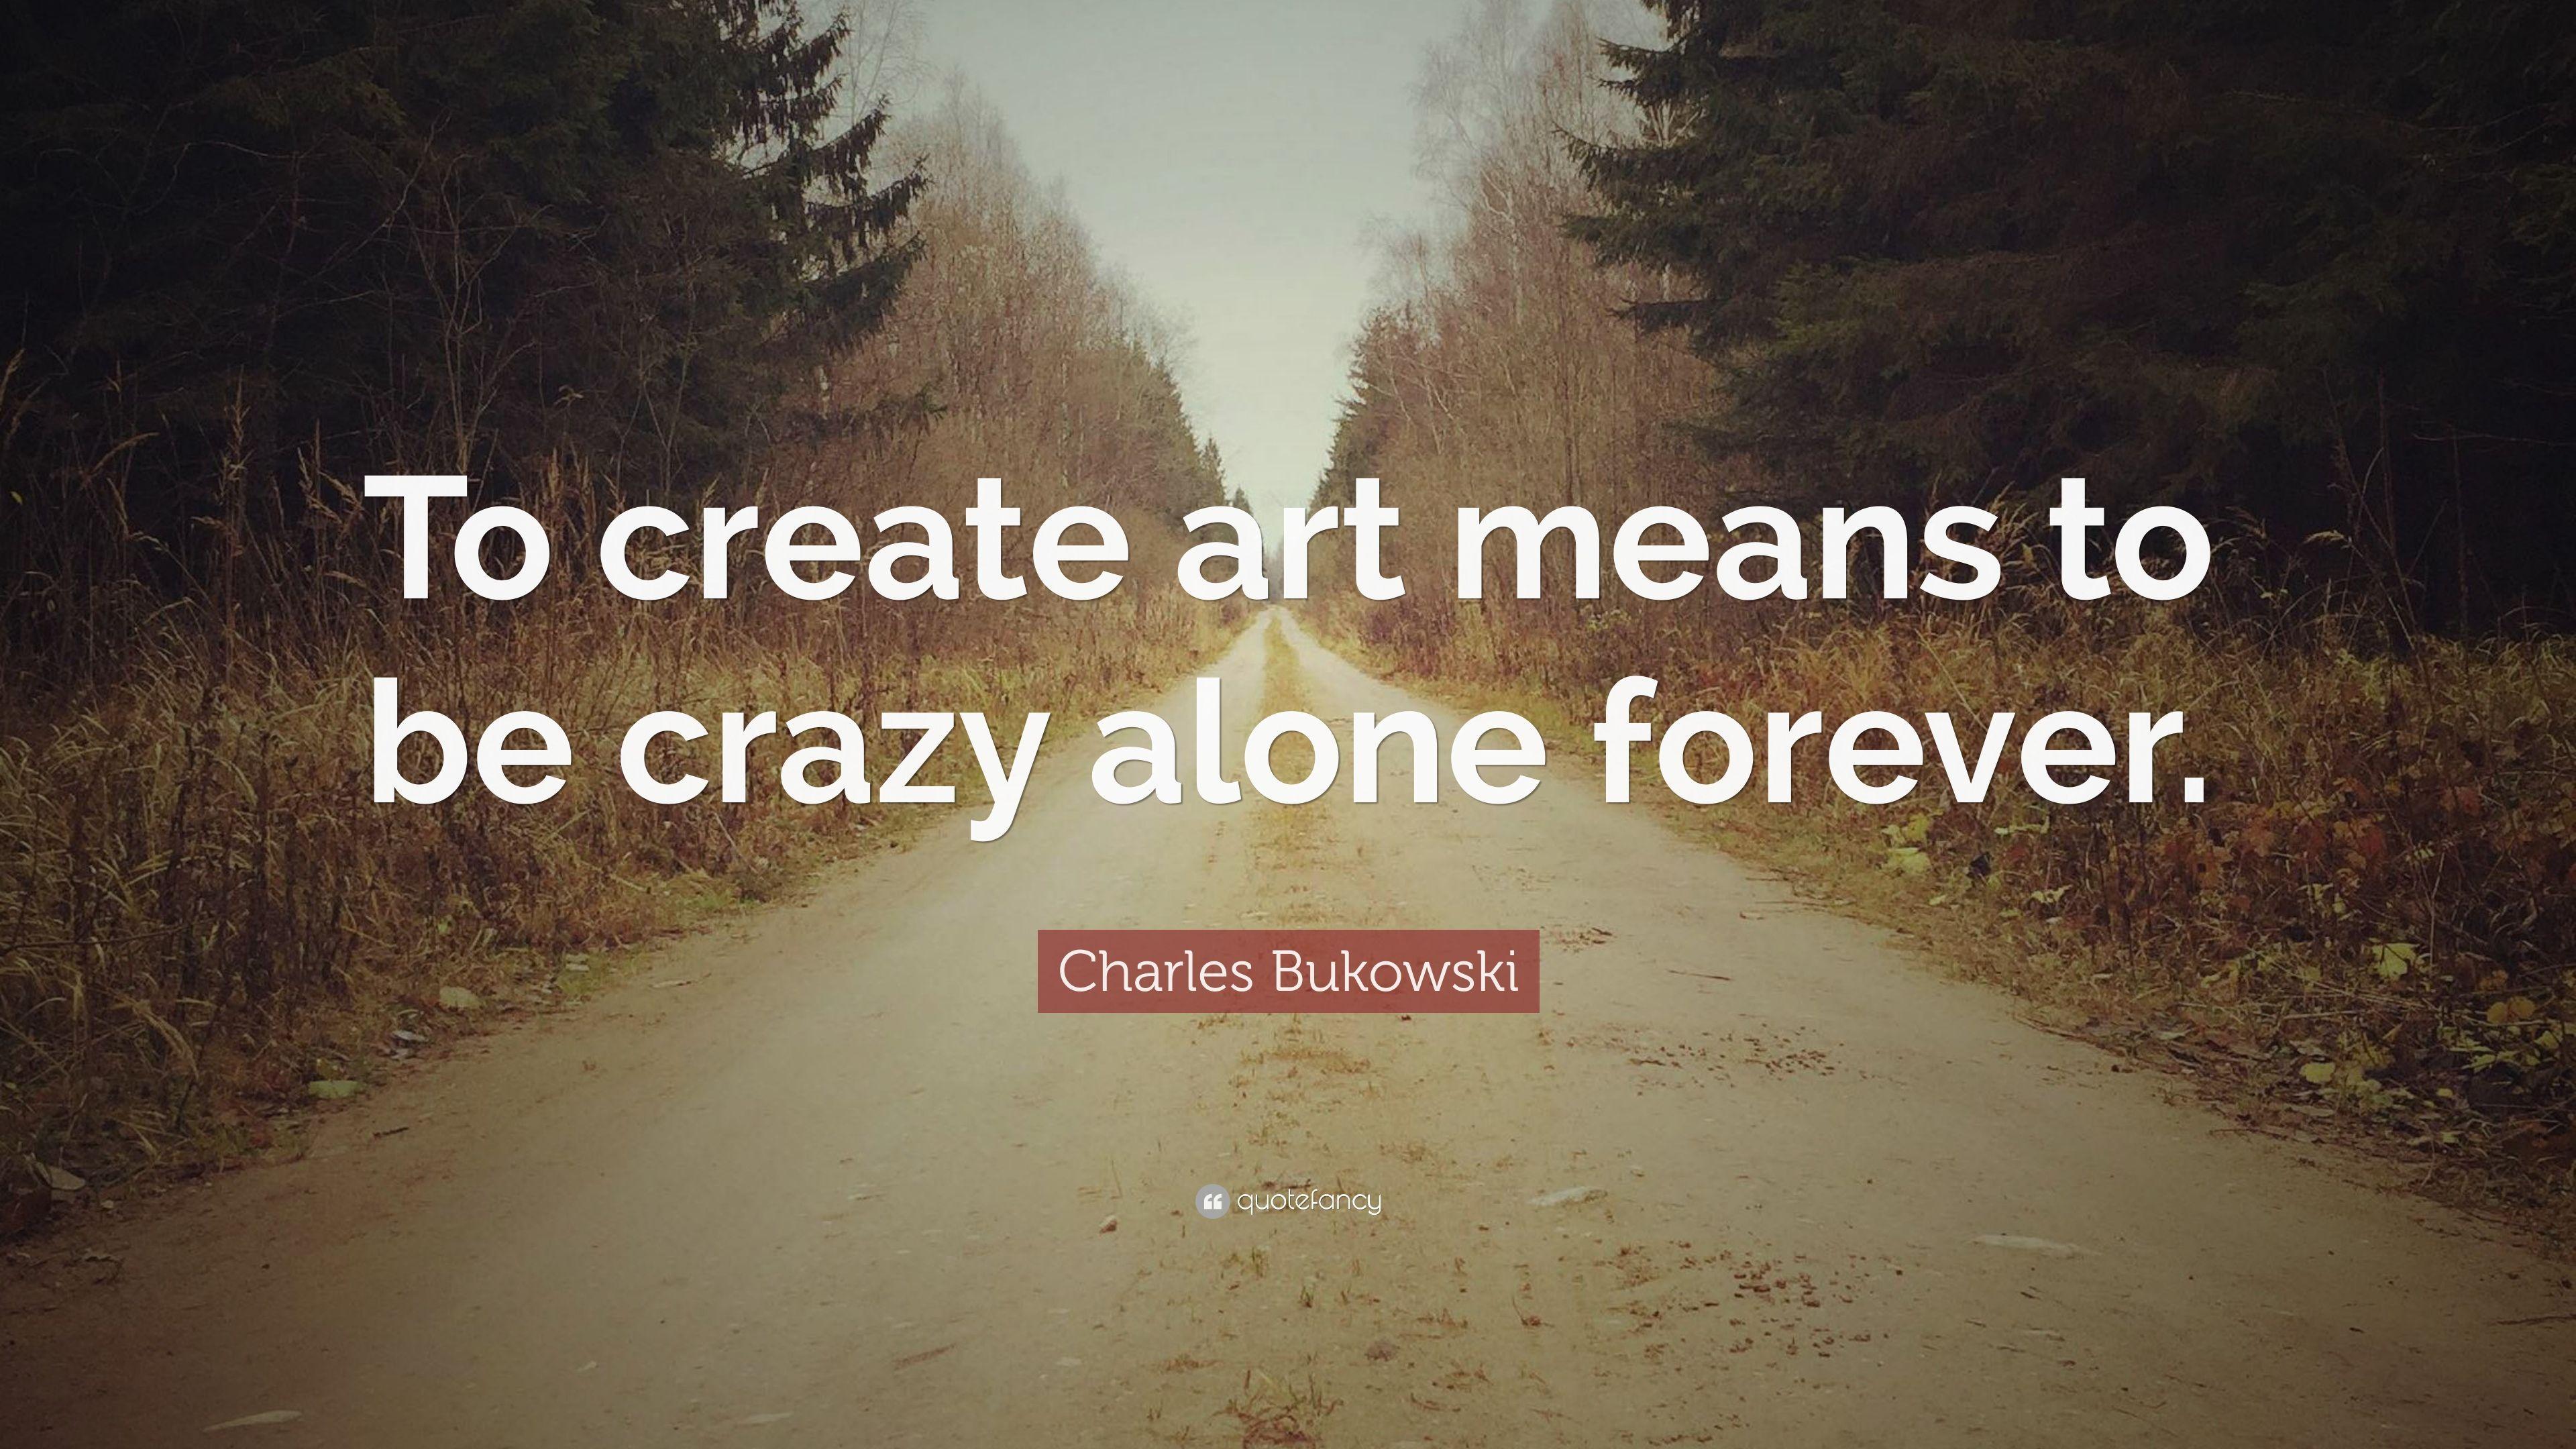 Charles Bukowski Quote: “To create art means to be crazy alone